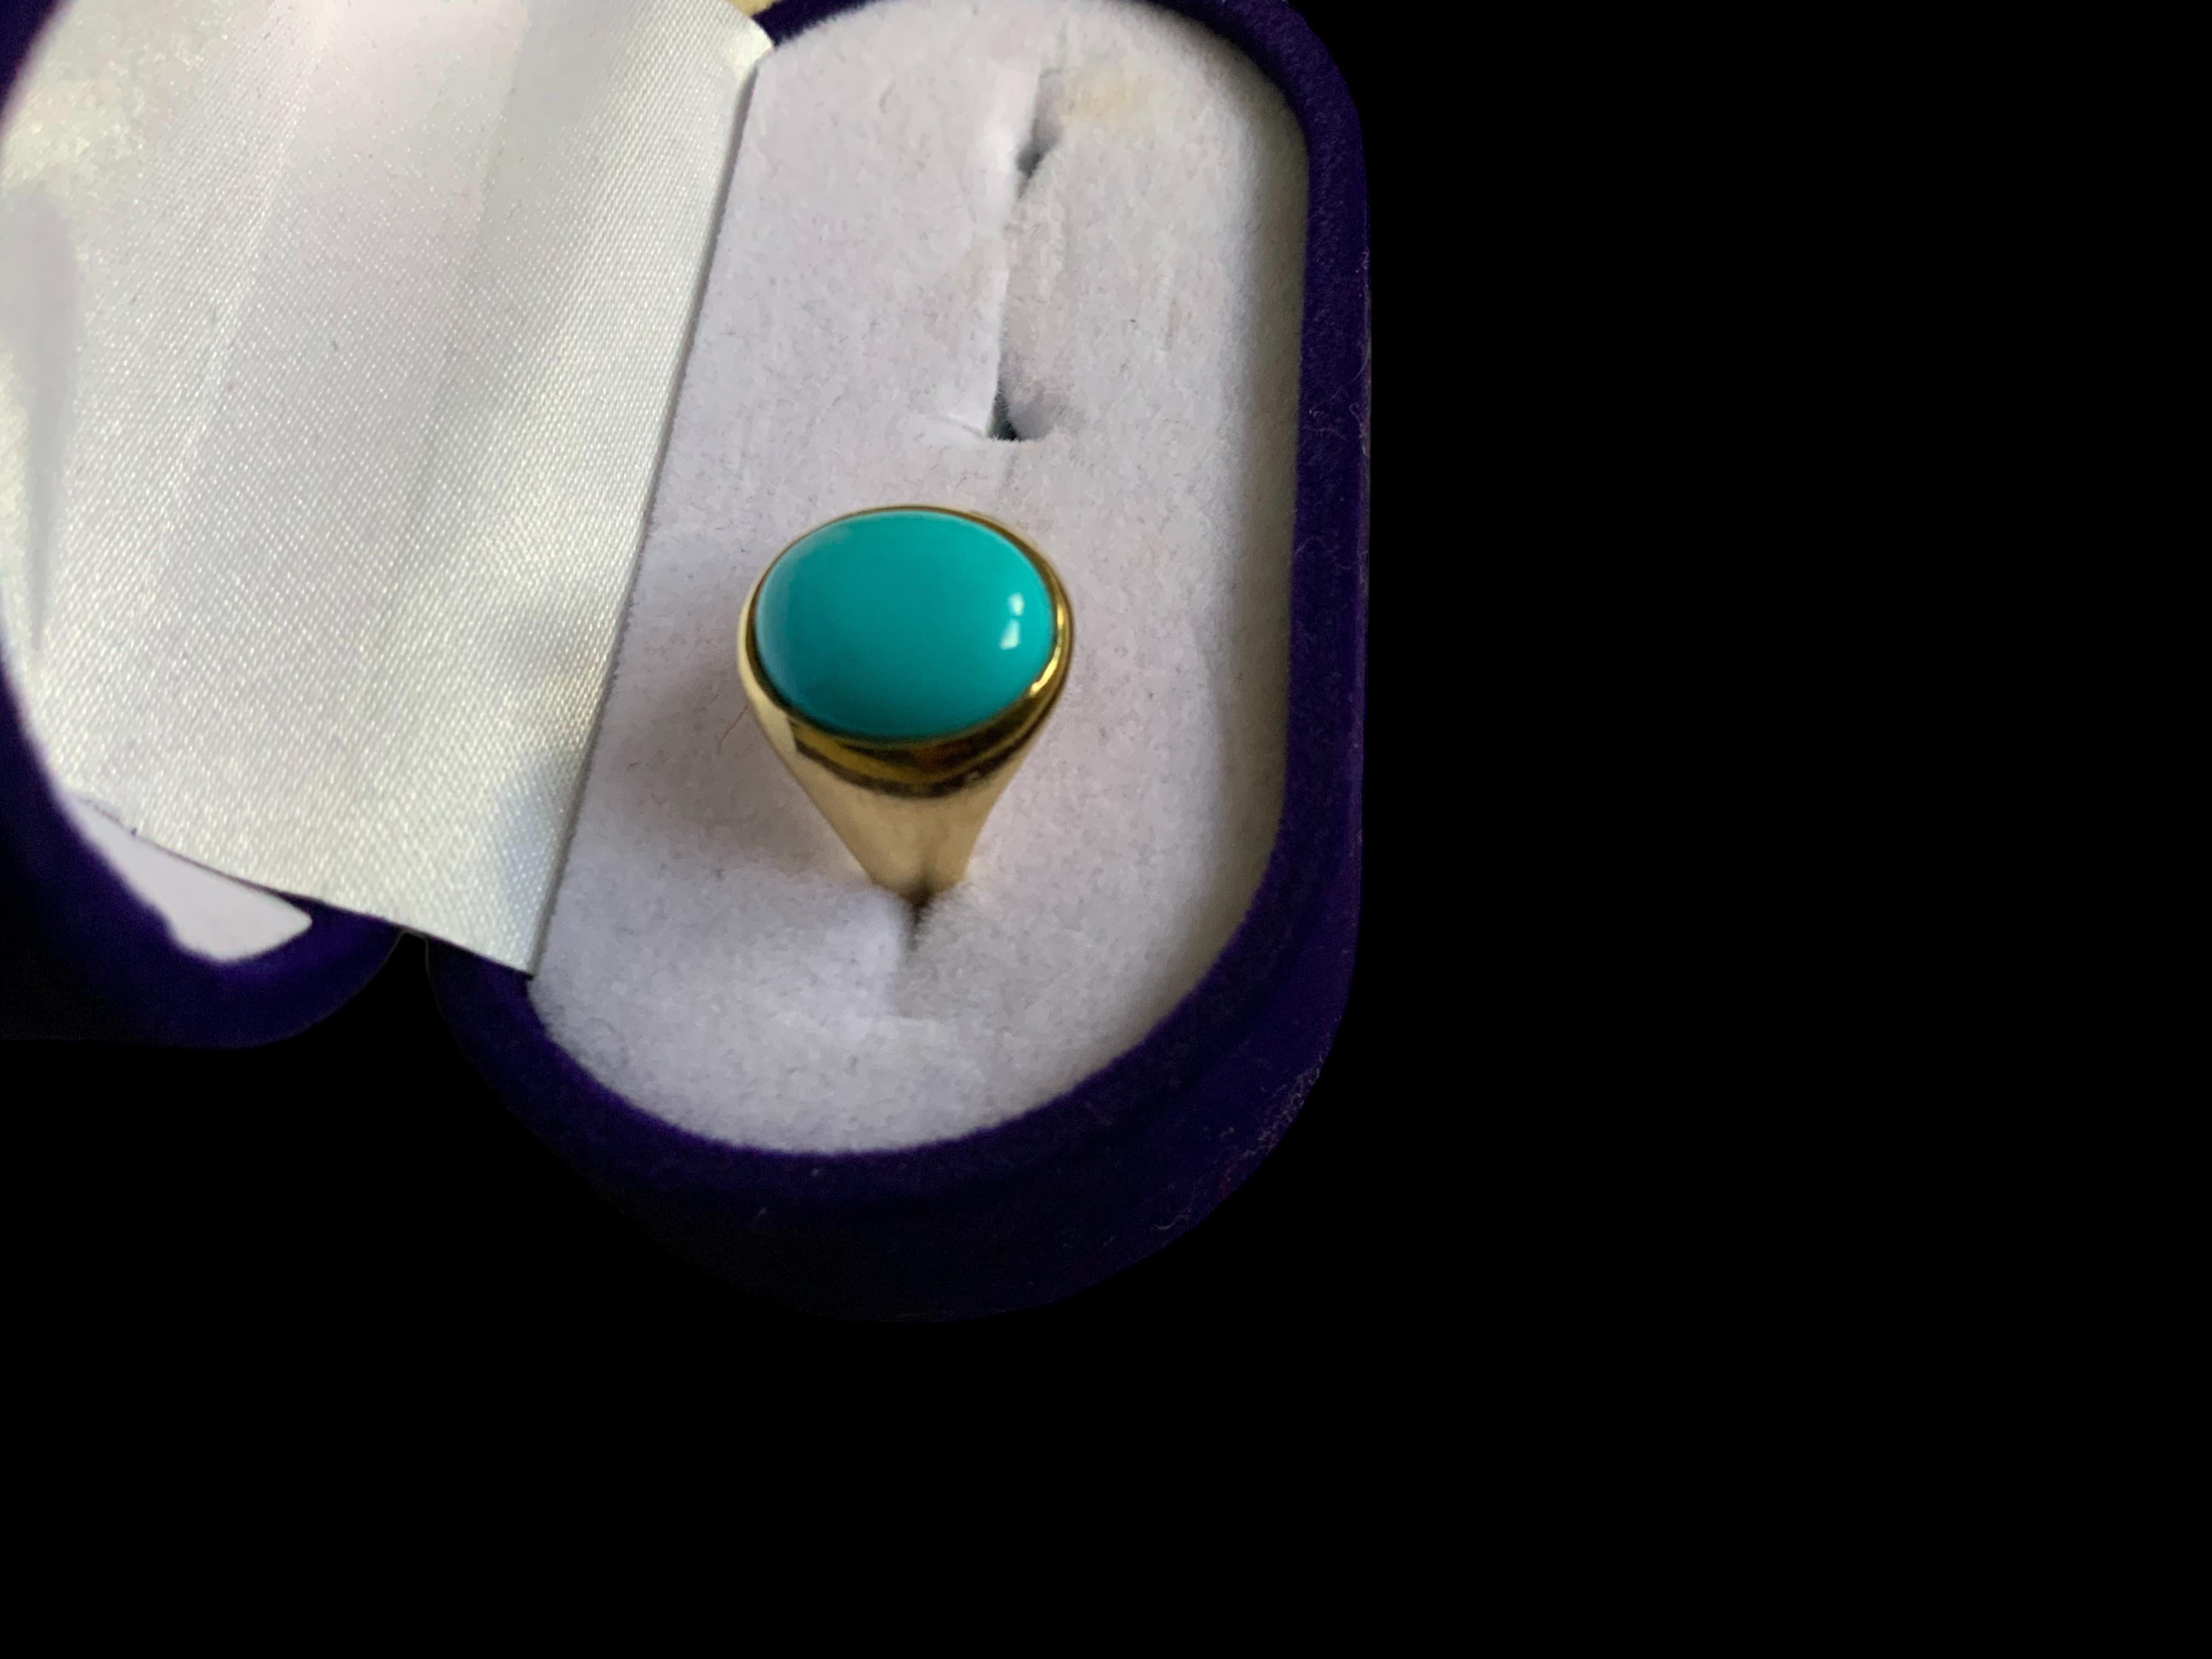 This is an 18K yellow gold and Turquoise ring. It depicts an oval shaped cabochon Turquoise stone mounted in gold bezel setting. The Turquoise’s width and length is 0.4 and 0.5 inches, respectively. The ring is signed 18K behind one of the shank.